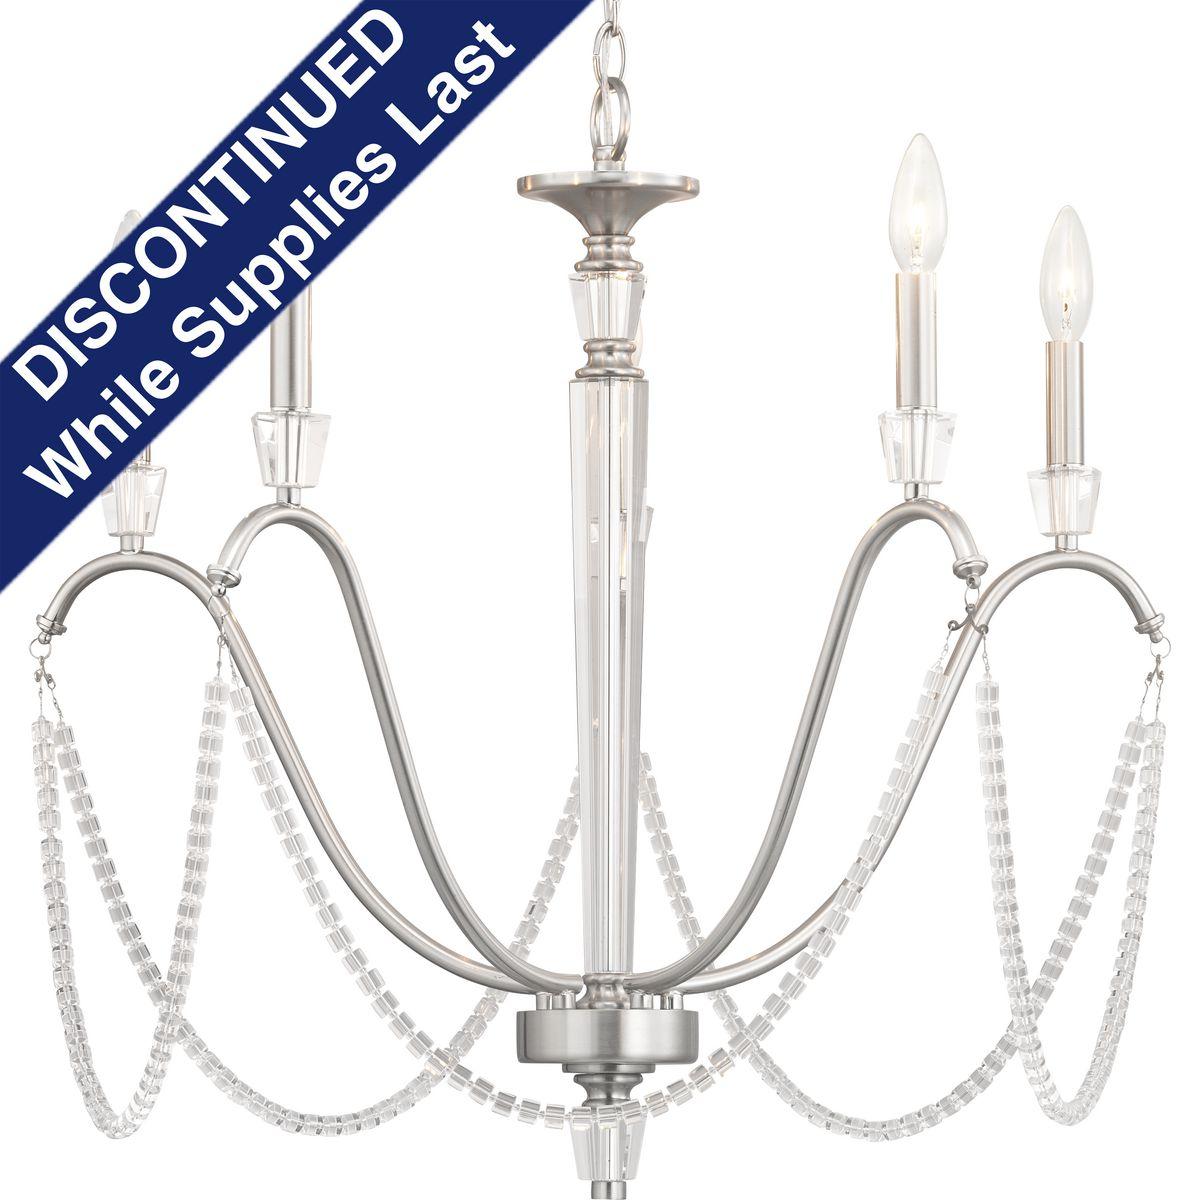 Hubbell P400160-009 With a glamorous and modern appeal, the Stratham Collection’s five-light chandelier features a sparkling string of cylindrical drops and a stunning, faceted K9 glass column. Opulent accent finials complete well-executed design to add dimension and overall